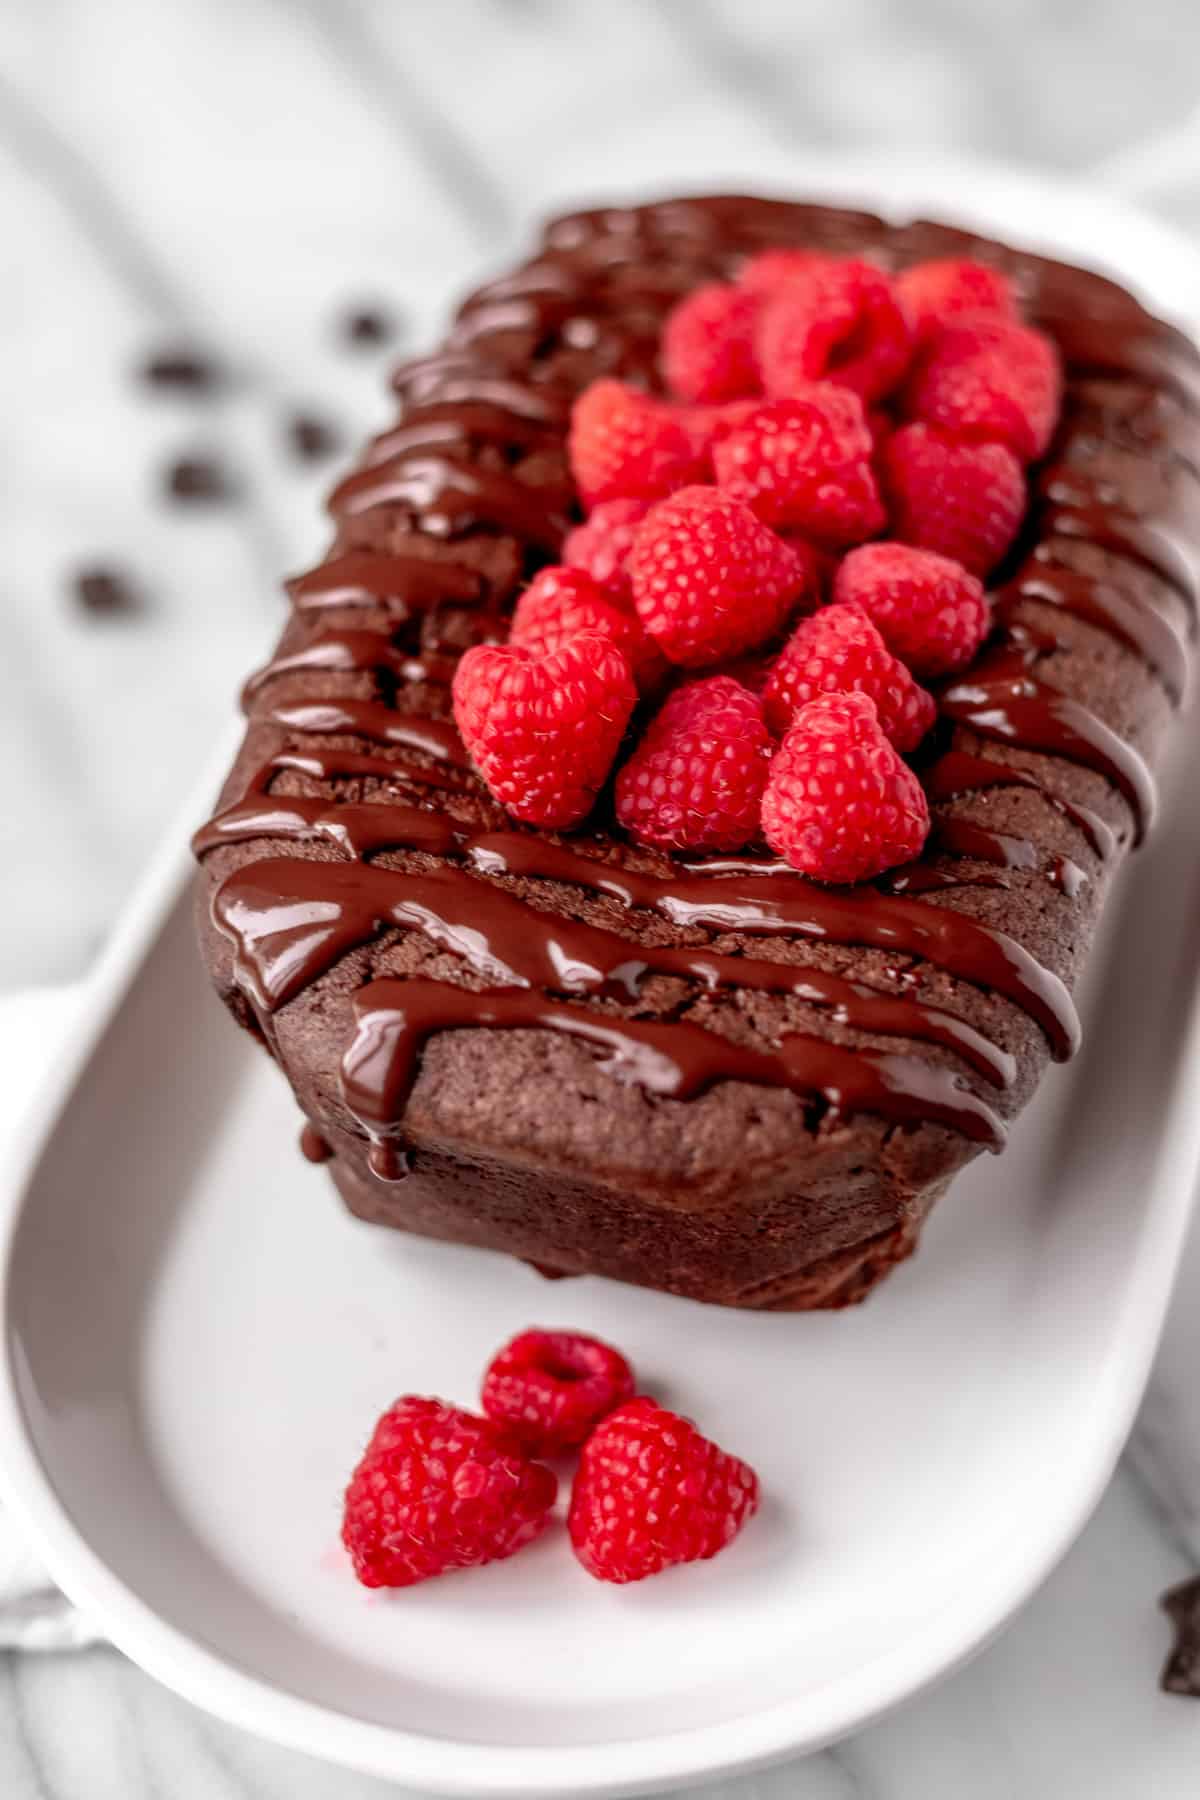 A chocolate pound cake topped with raspberries on a white serving plate.